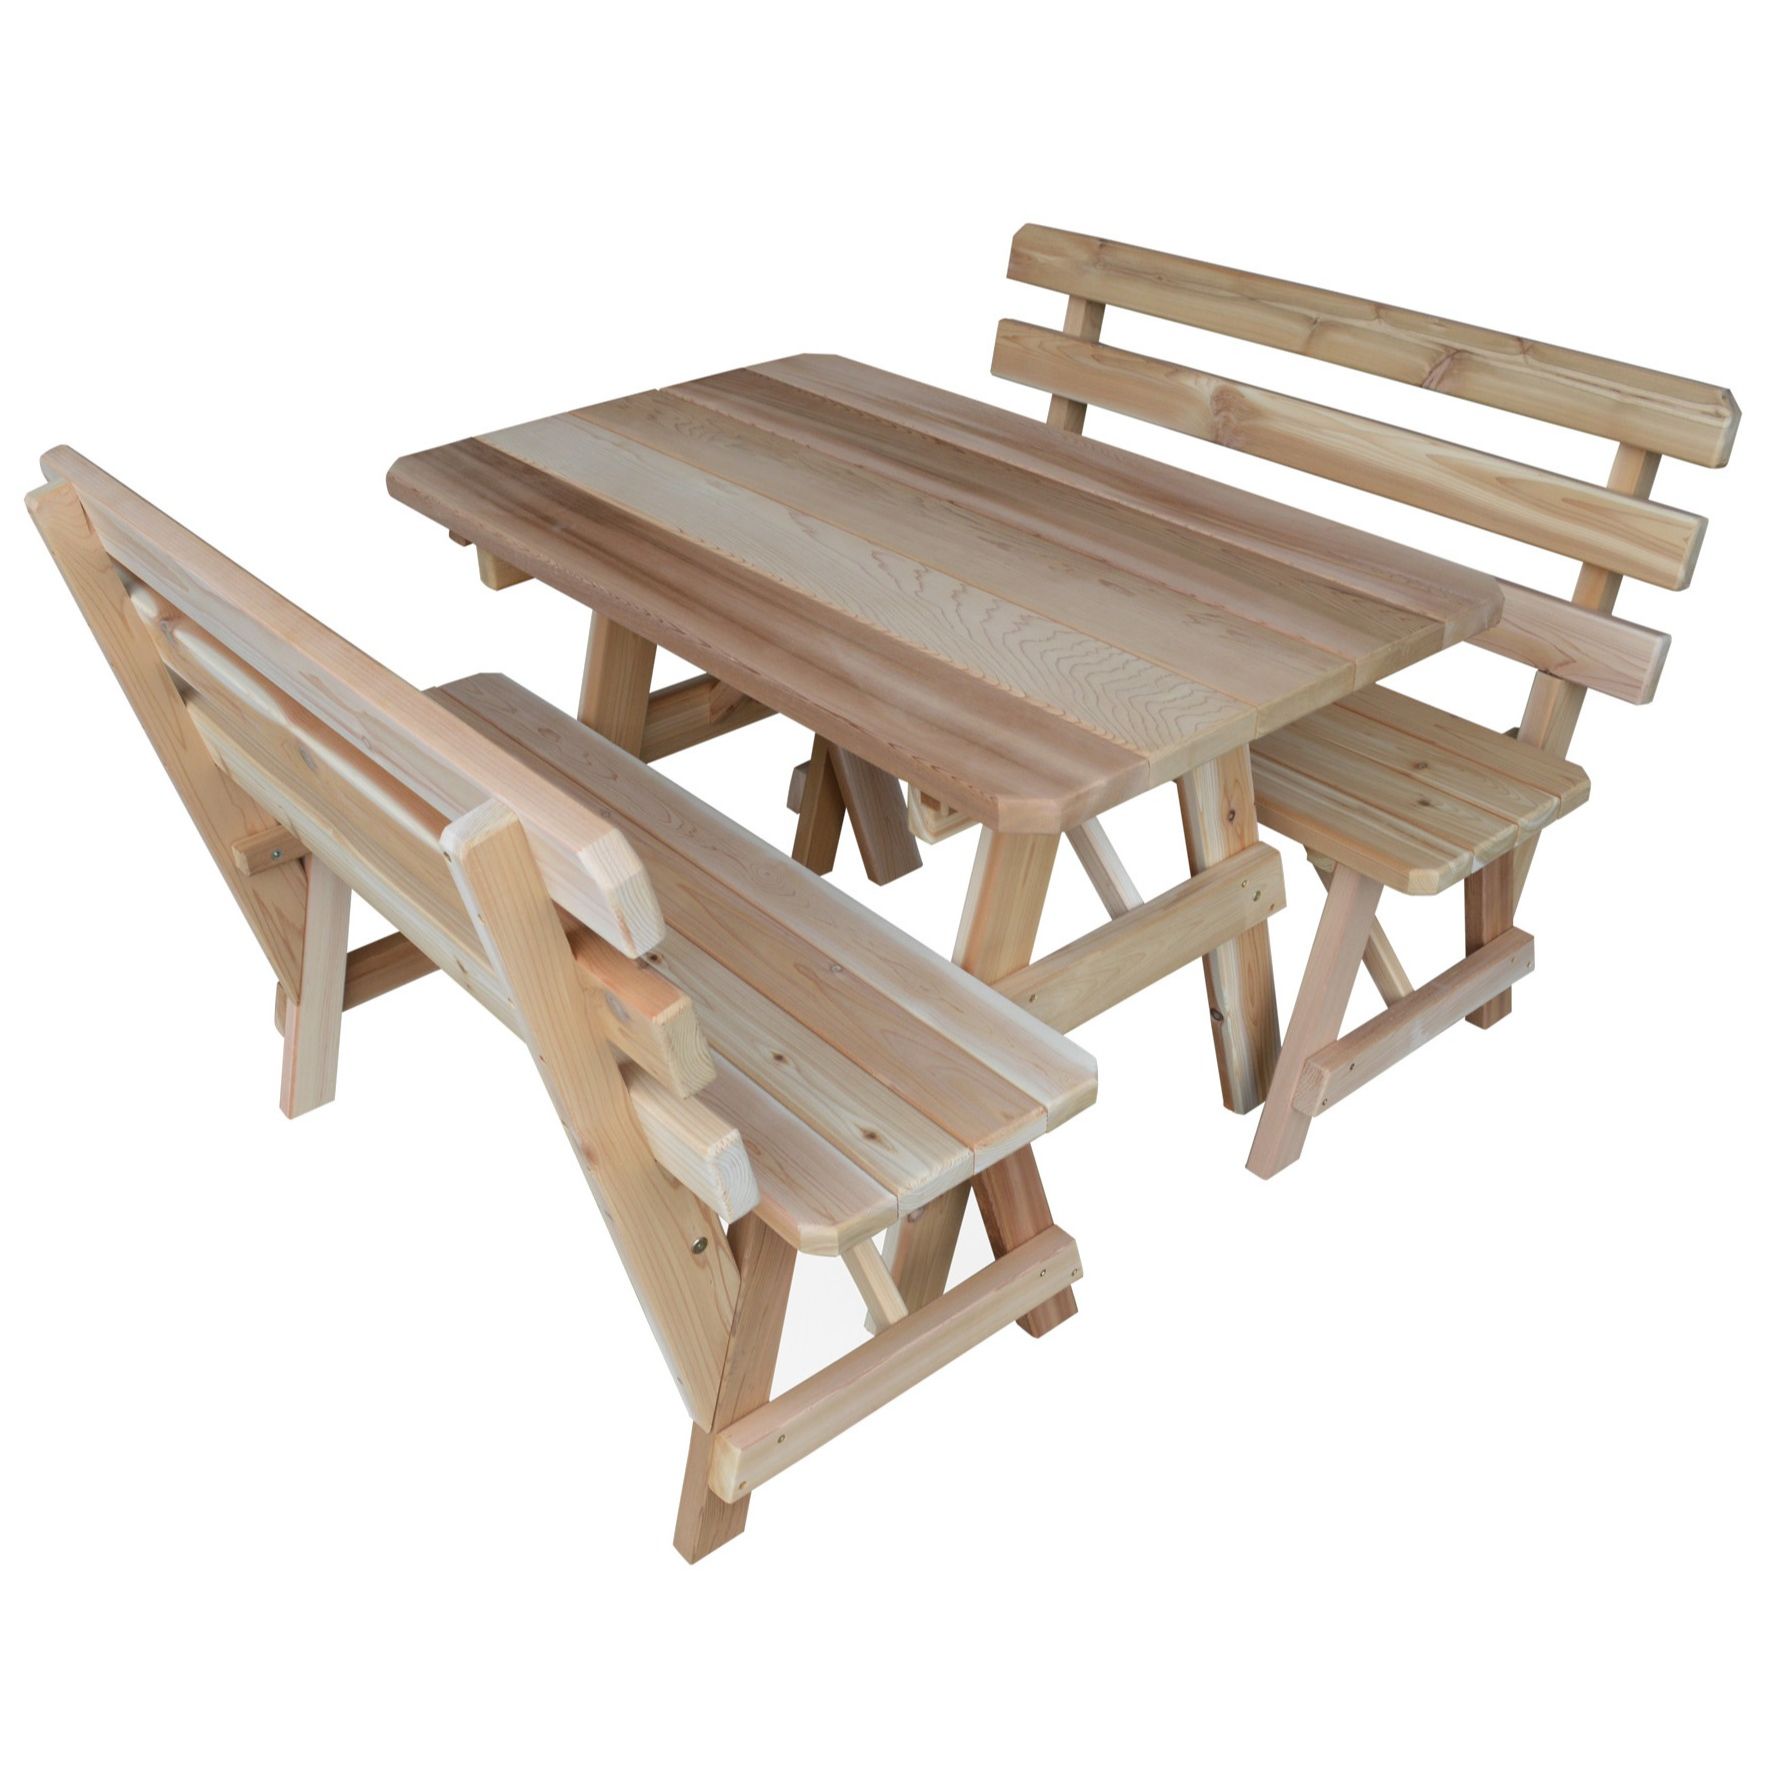 A&L Furniture Cedar Picnic Table with Backed Benches